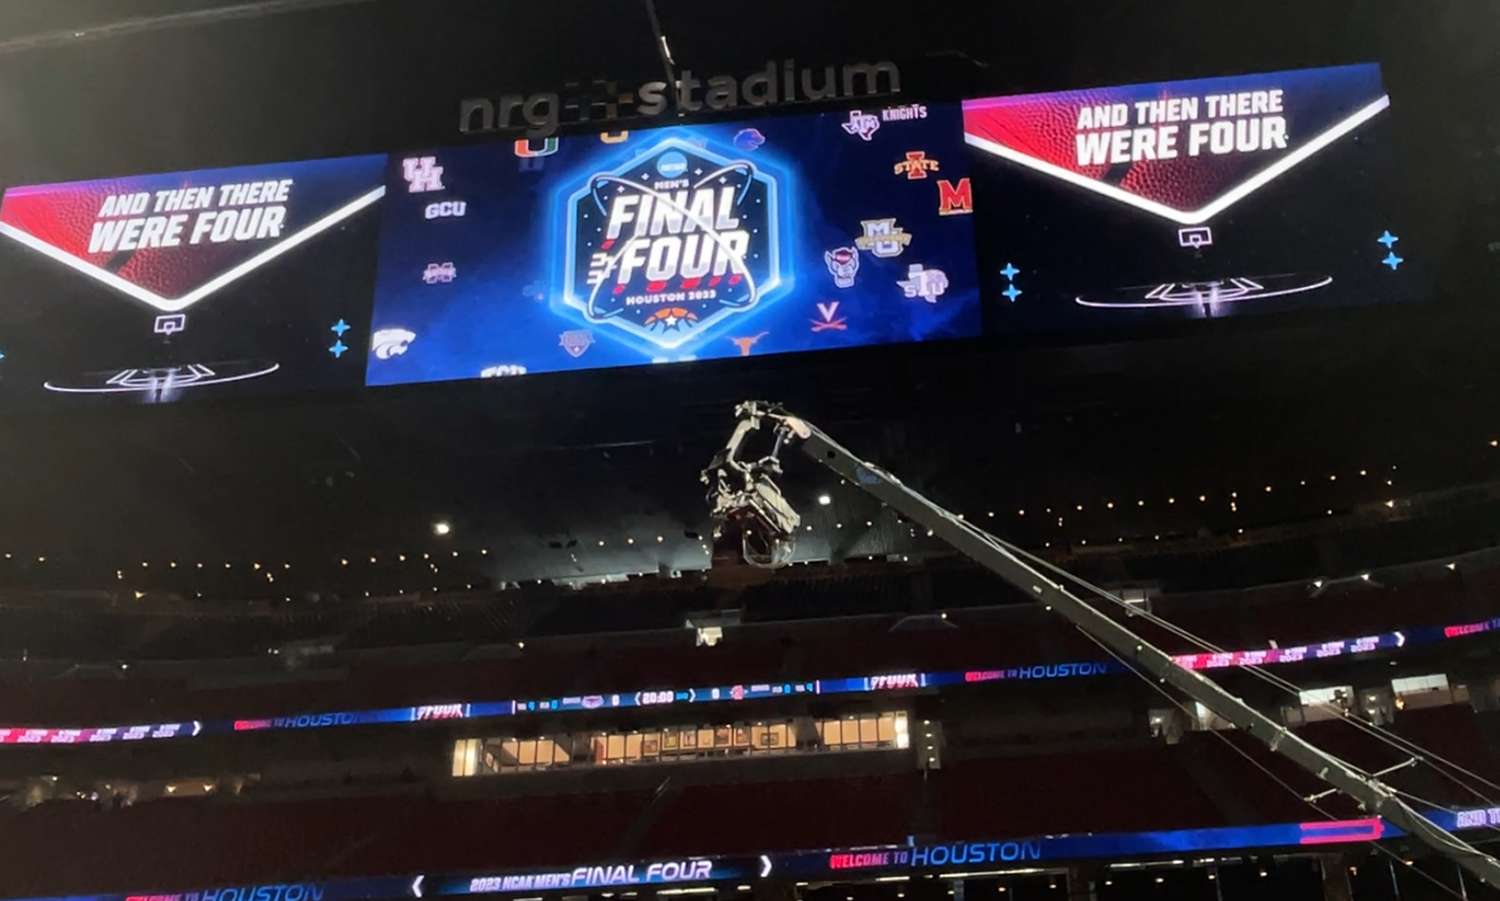 Live From Men's Final Four: CBS Sports, WBD Sports Continue to Innovate  With Big Show in Houston